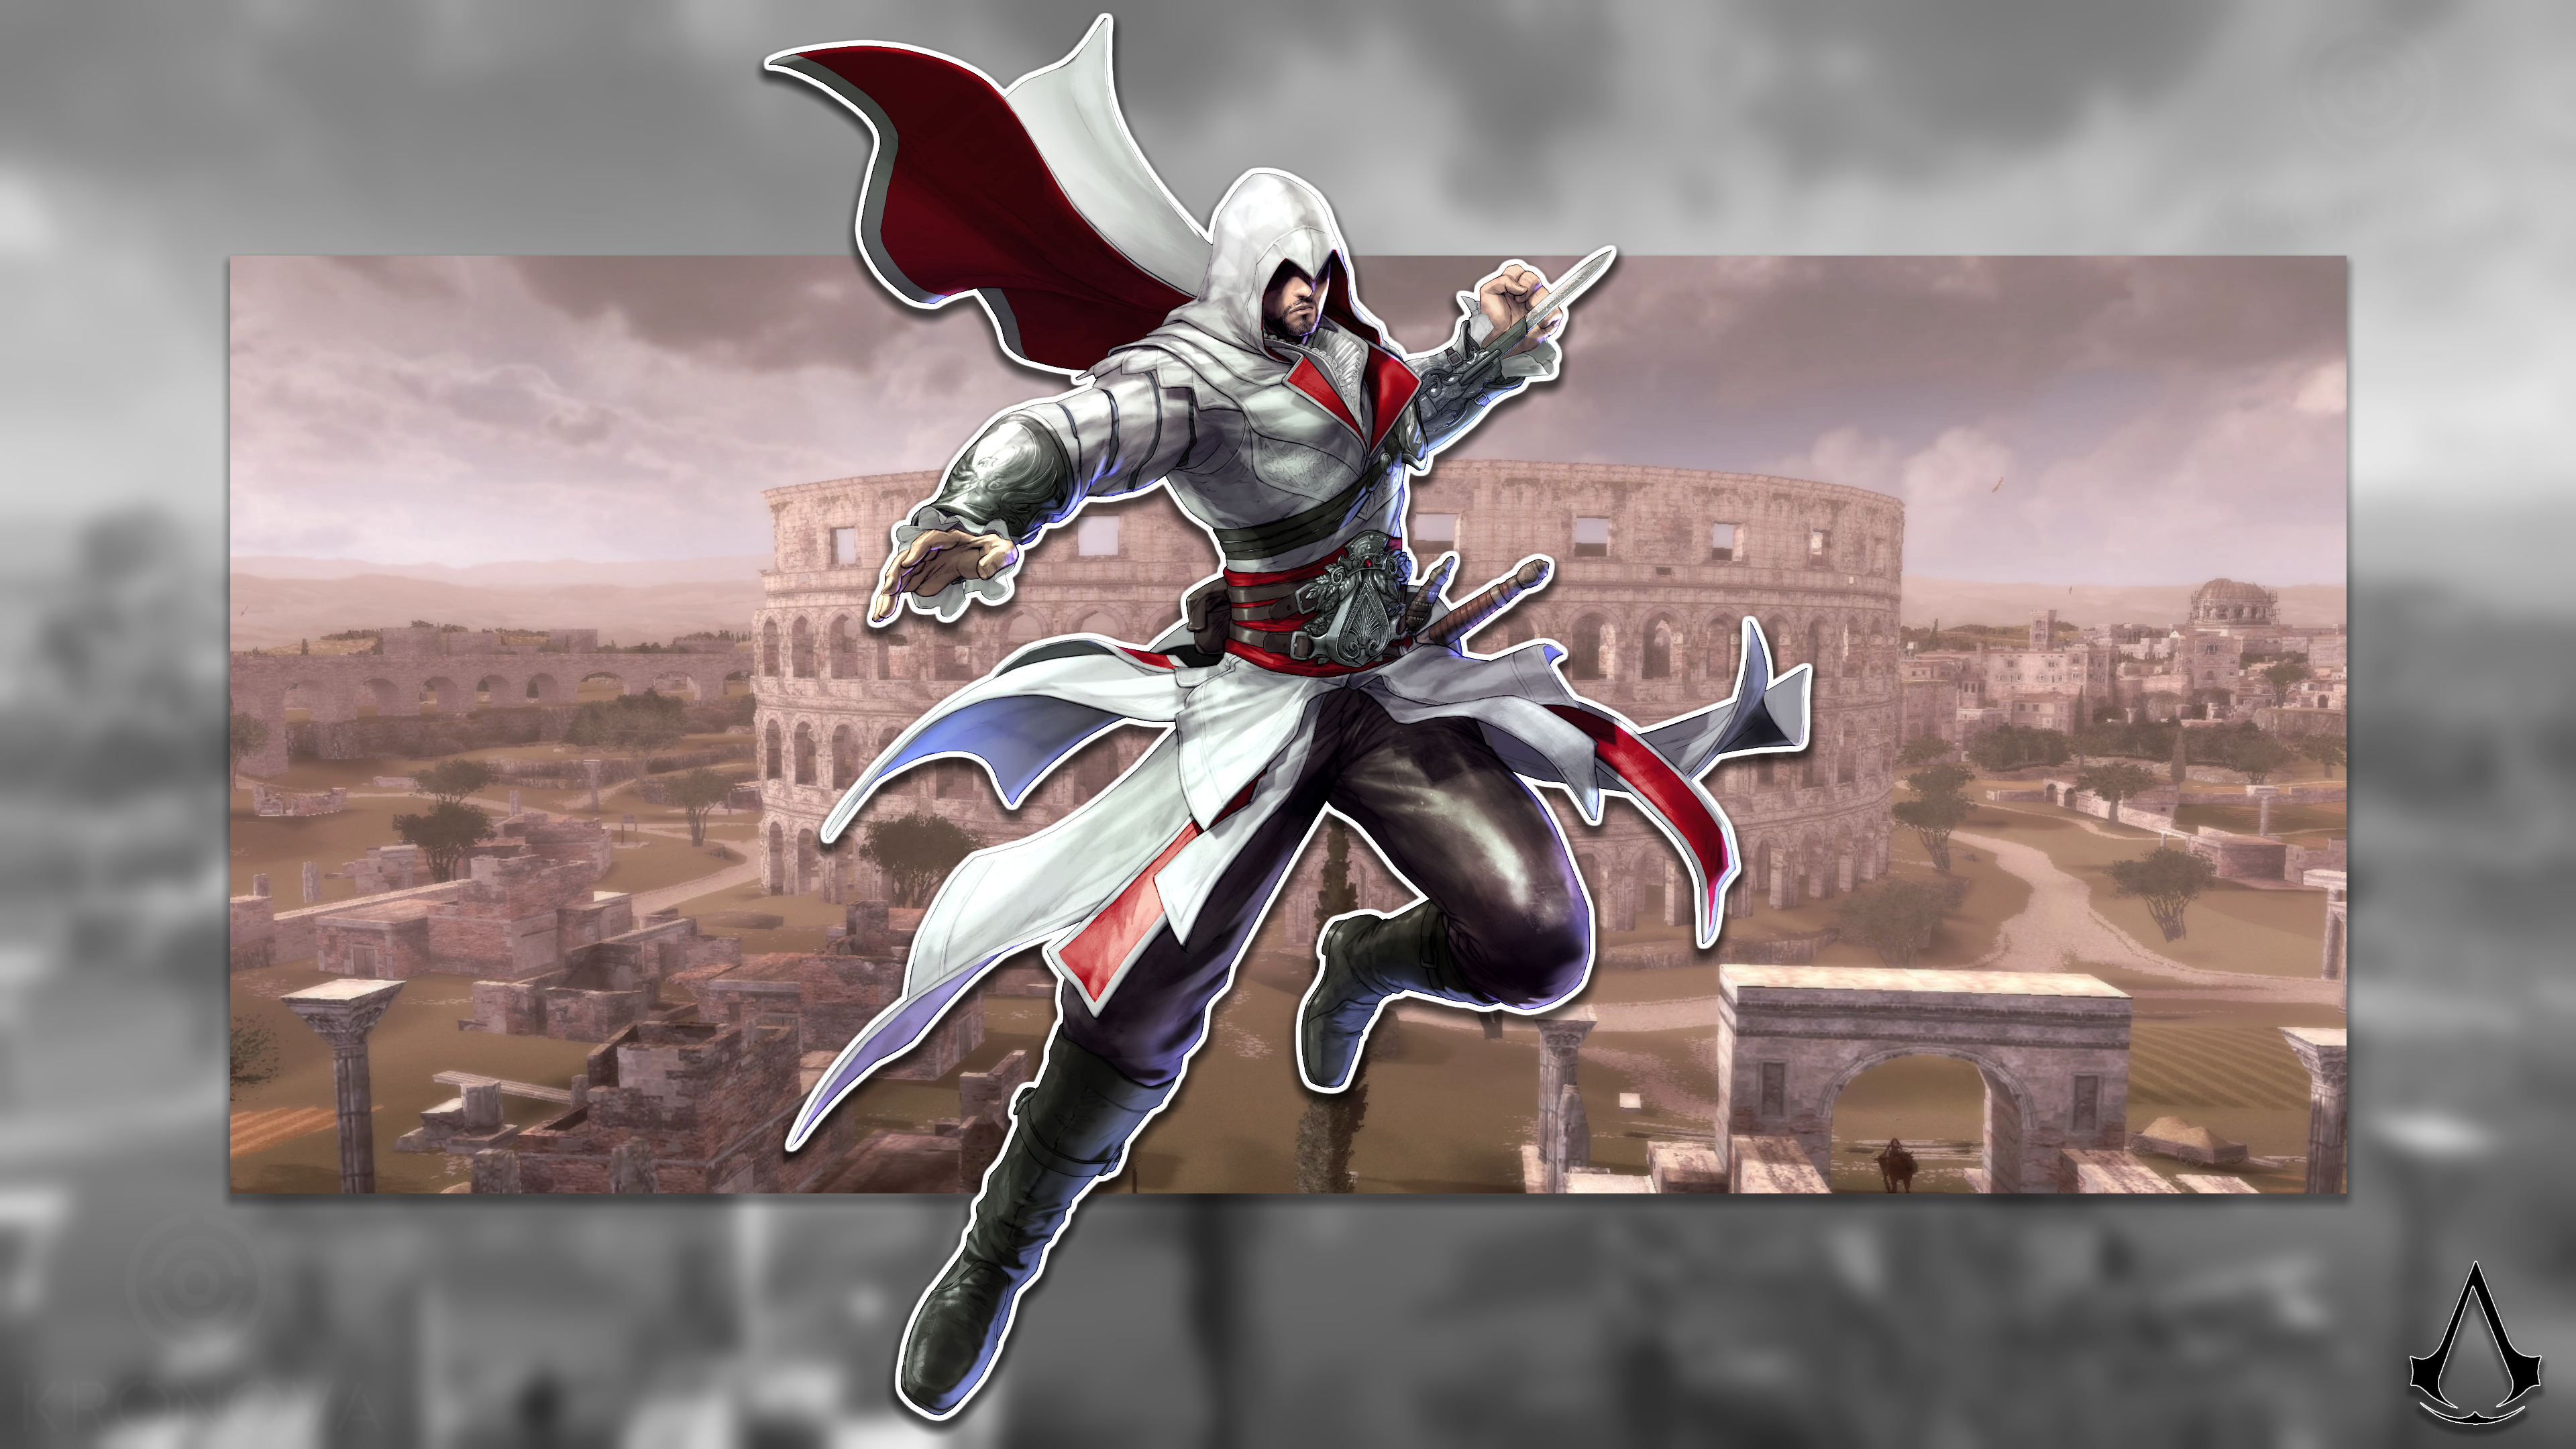 General 3840x2160 Assassin's Creed Assassin's Creed 2 Ezio Auditore da Firenze video games video game characters Ubisoft